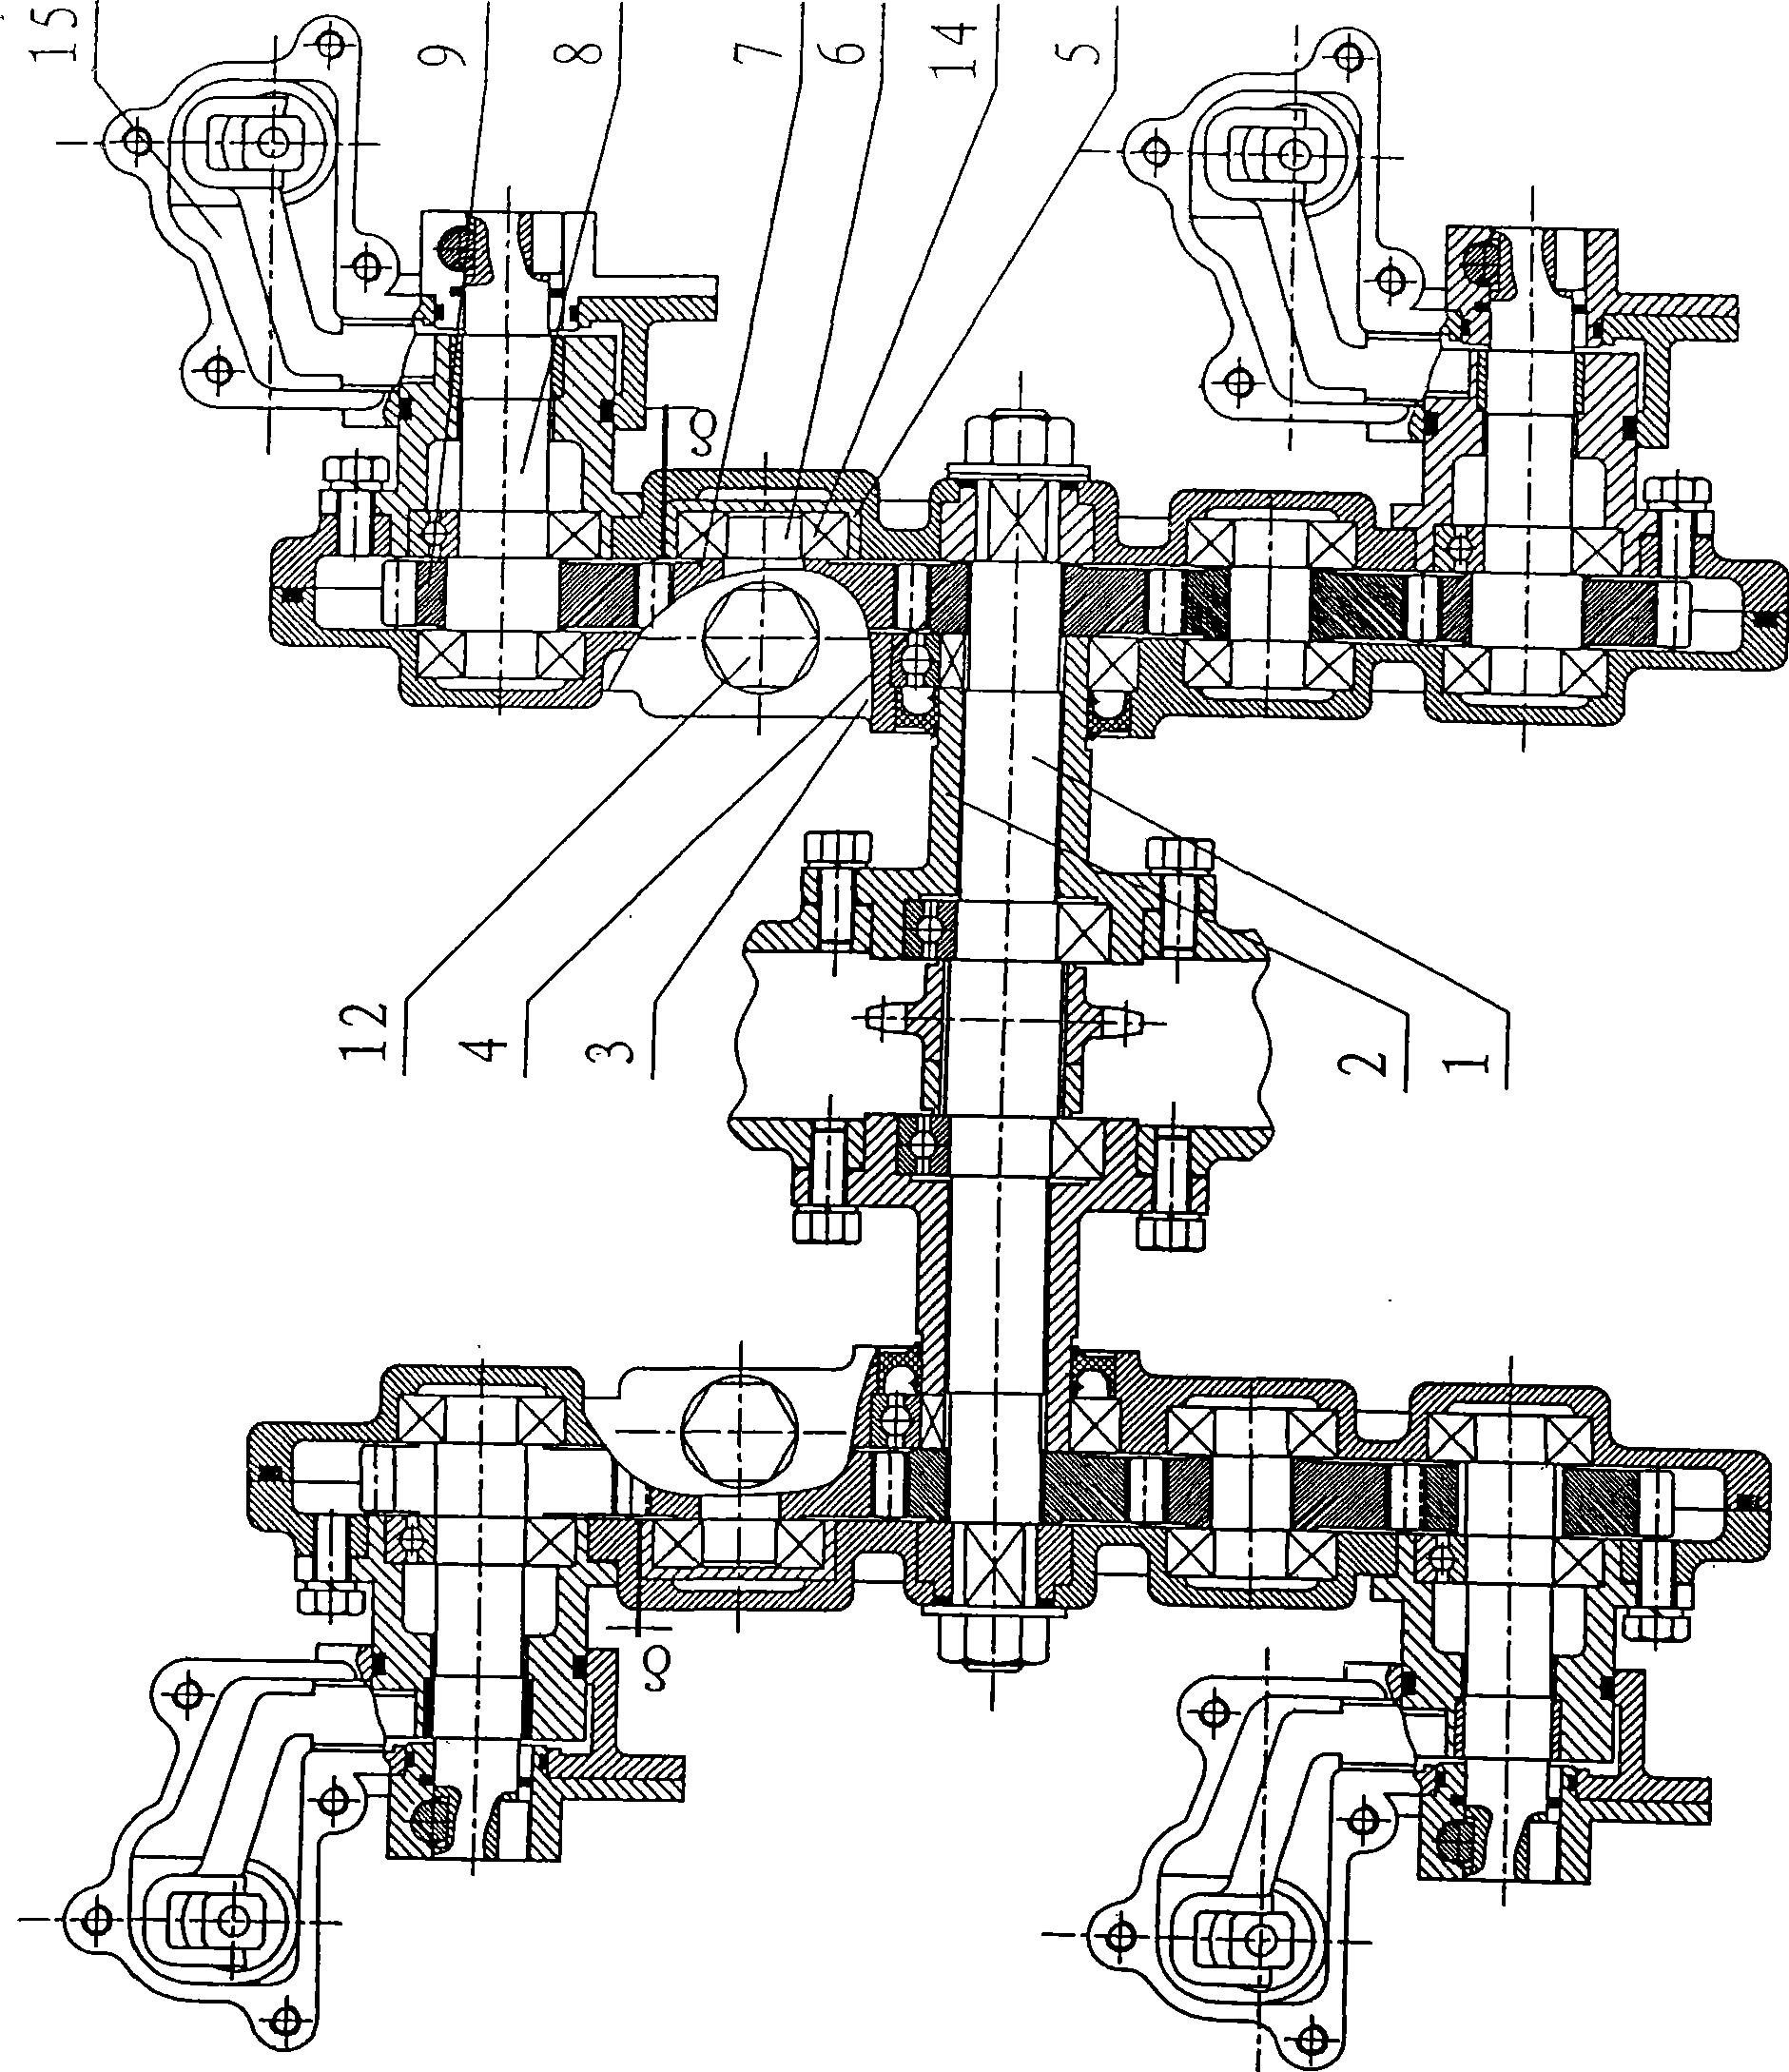 Pitch-play-removing elliptic gear transmission system separately inserting mechanism